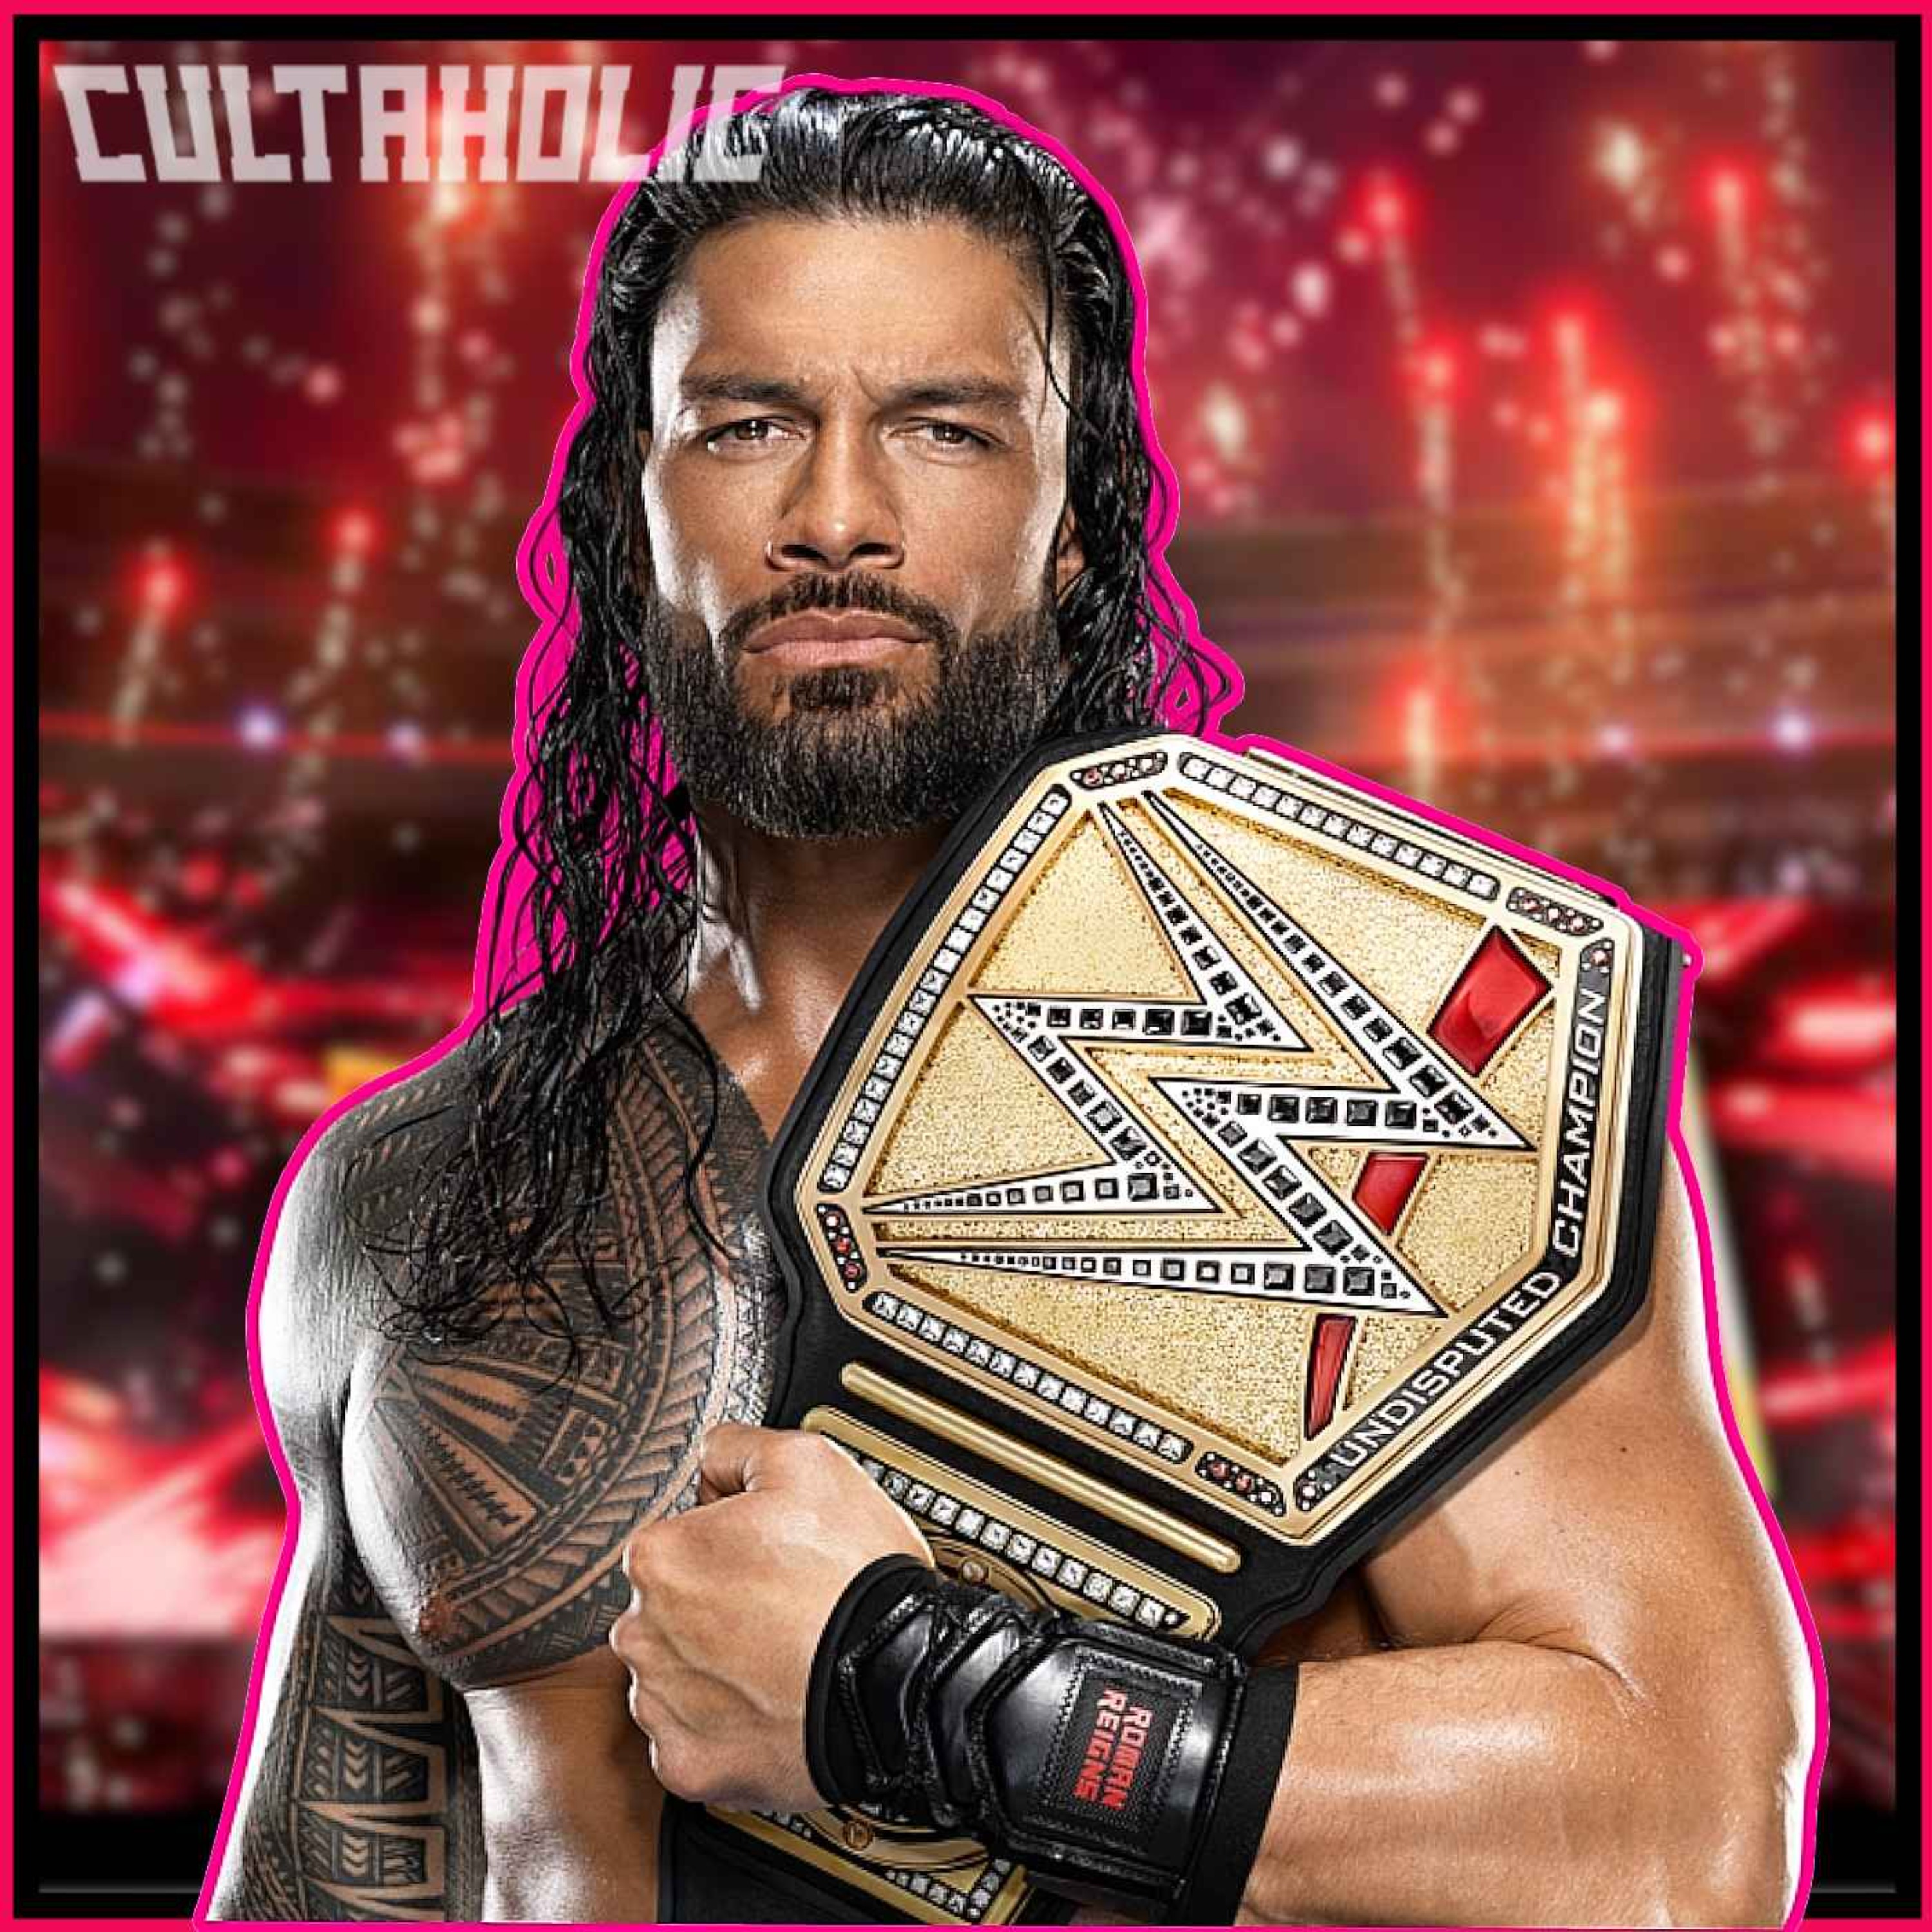 NEWS: ROMAN REIGNS WWE WrestleMania 40 Opponent Update | New Raw & SmackDown Champions Crowned | CULTAHOLIC WRESTLING NEWS